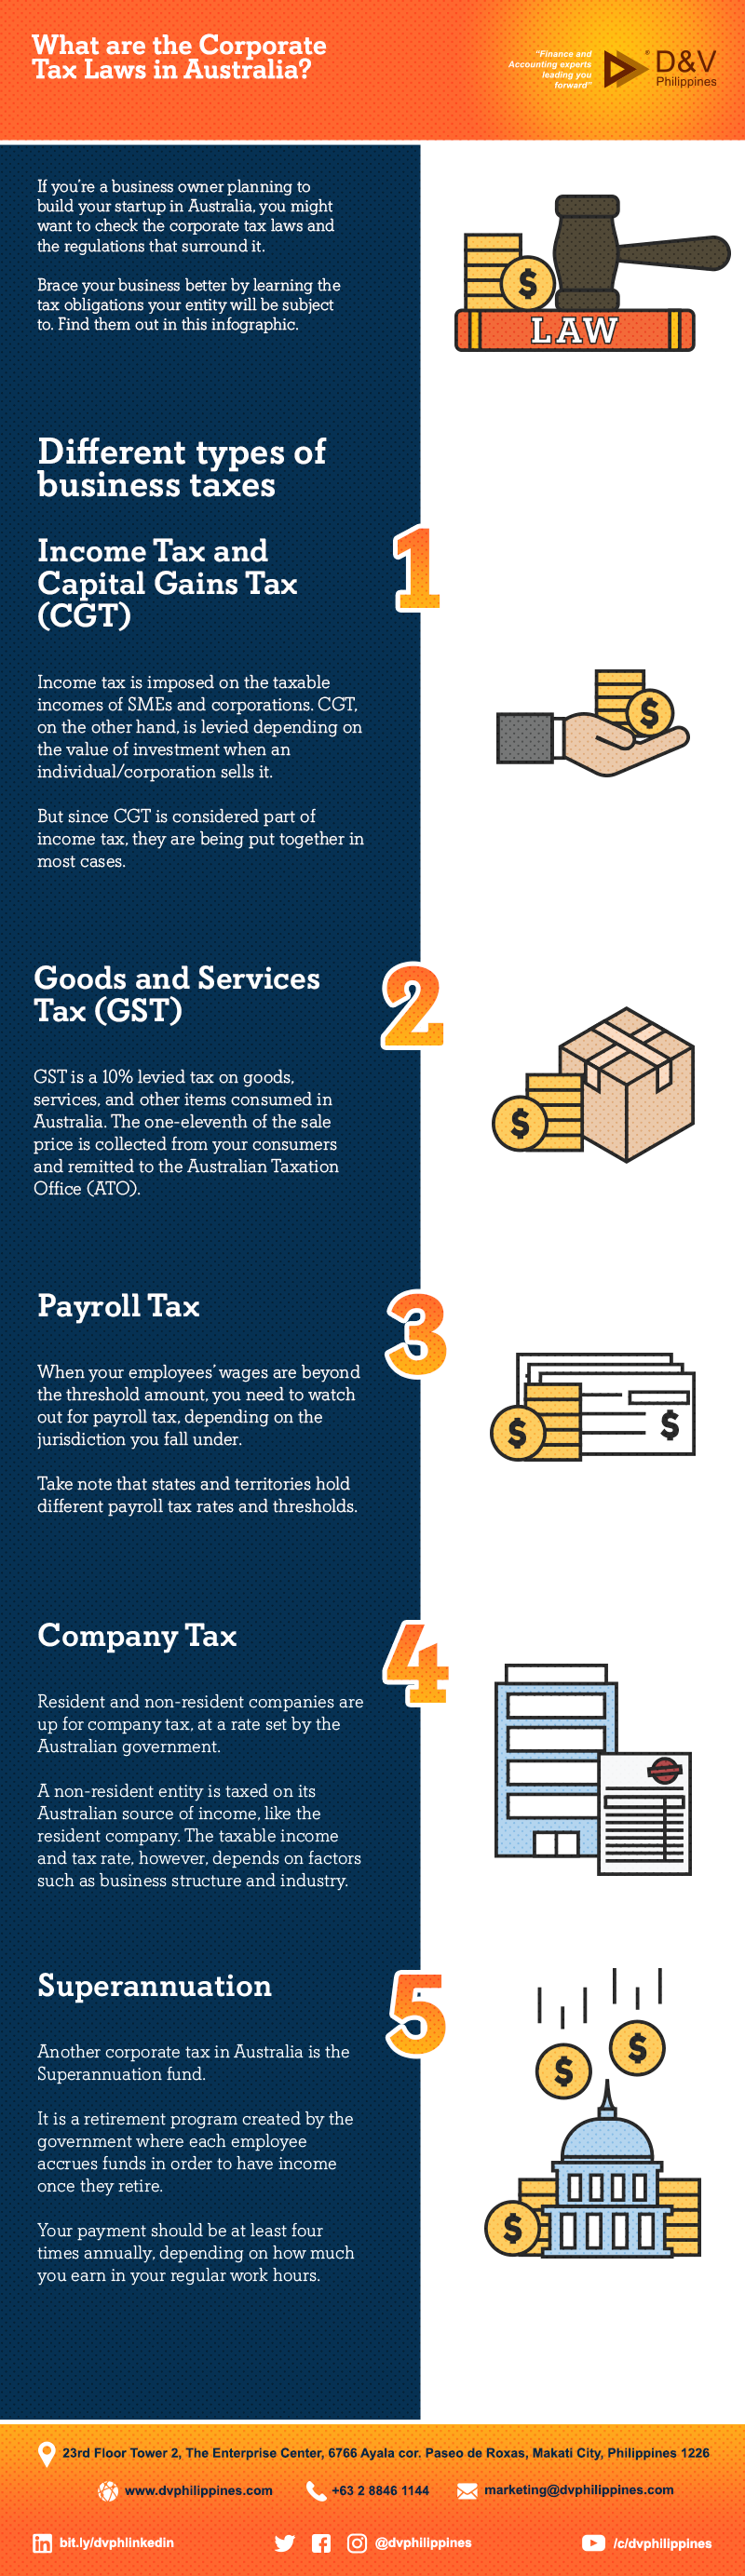 Infog_W_C_What are the Corporate Tax Laws in Australia